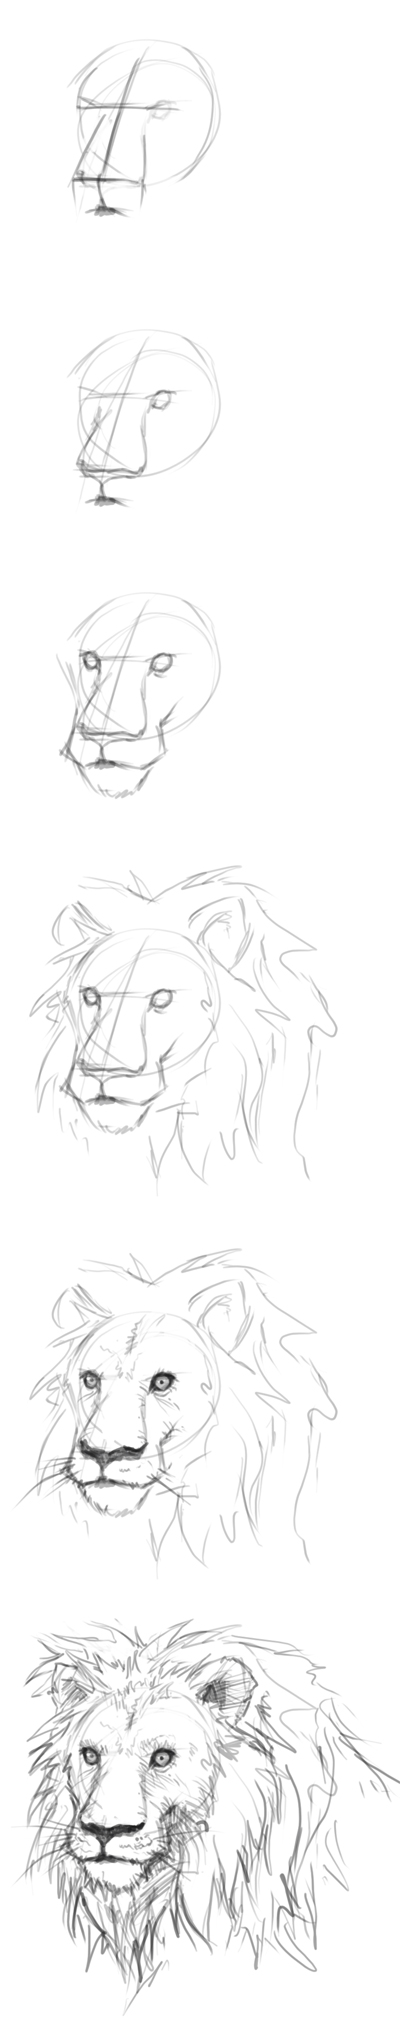 How to draw lion | Digital painting and drawing video tutorials ...